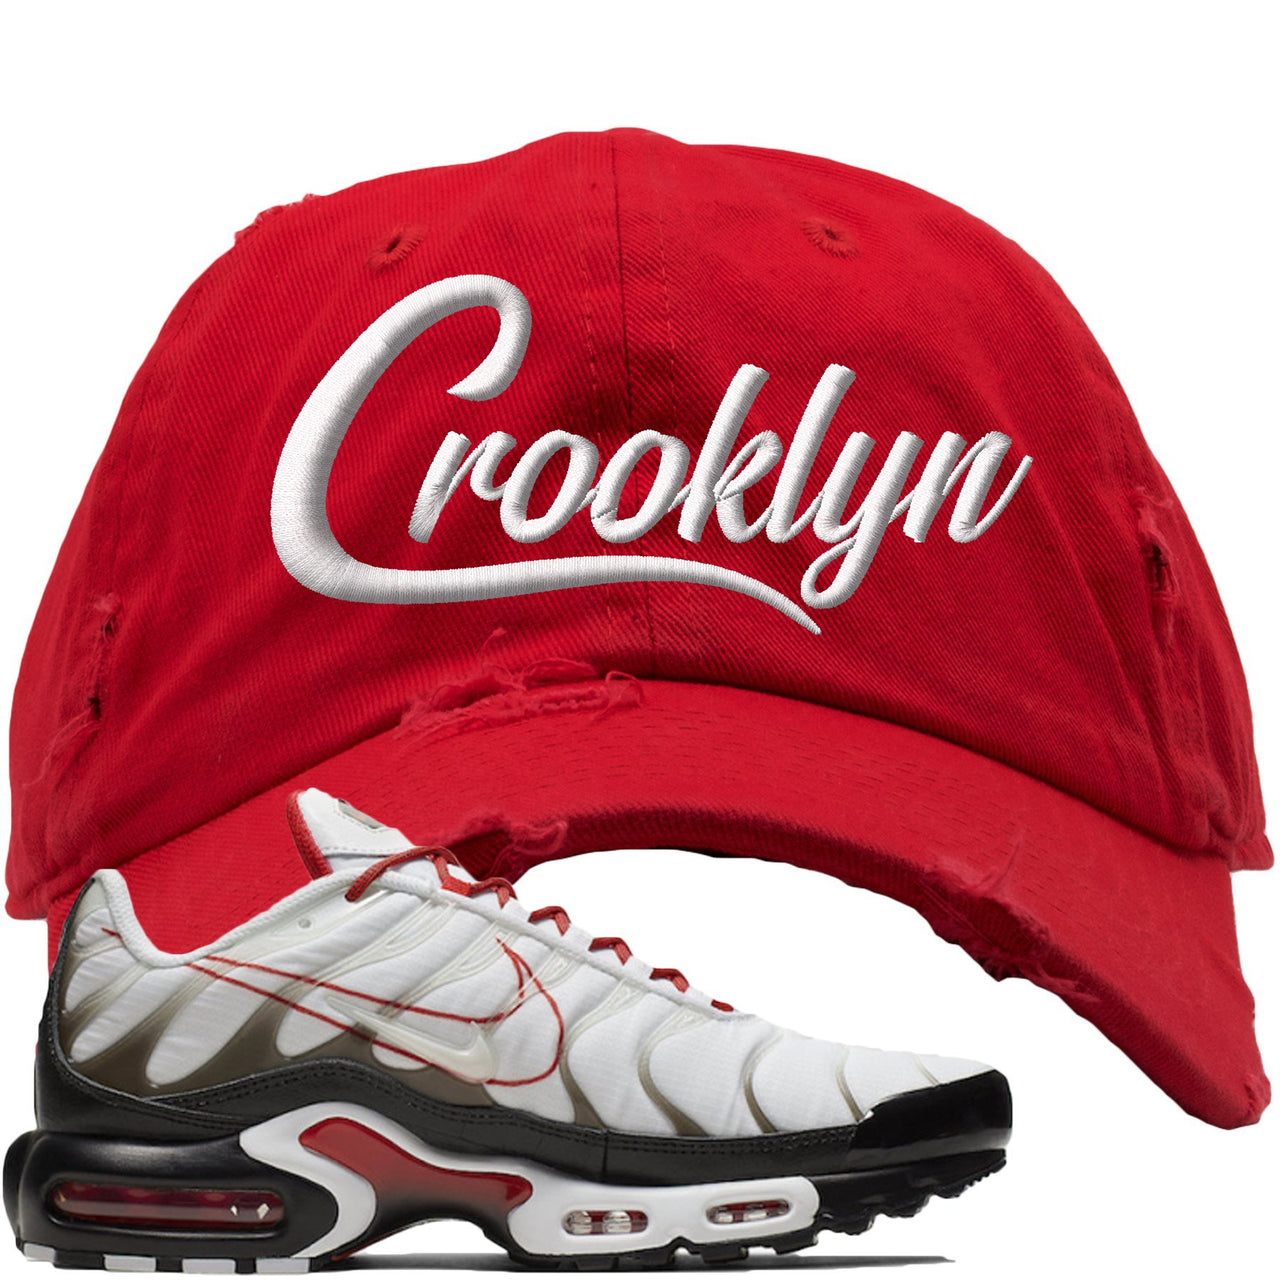 White University Red Pluses Distressed Dad Hat | Crooklyn, Red